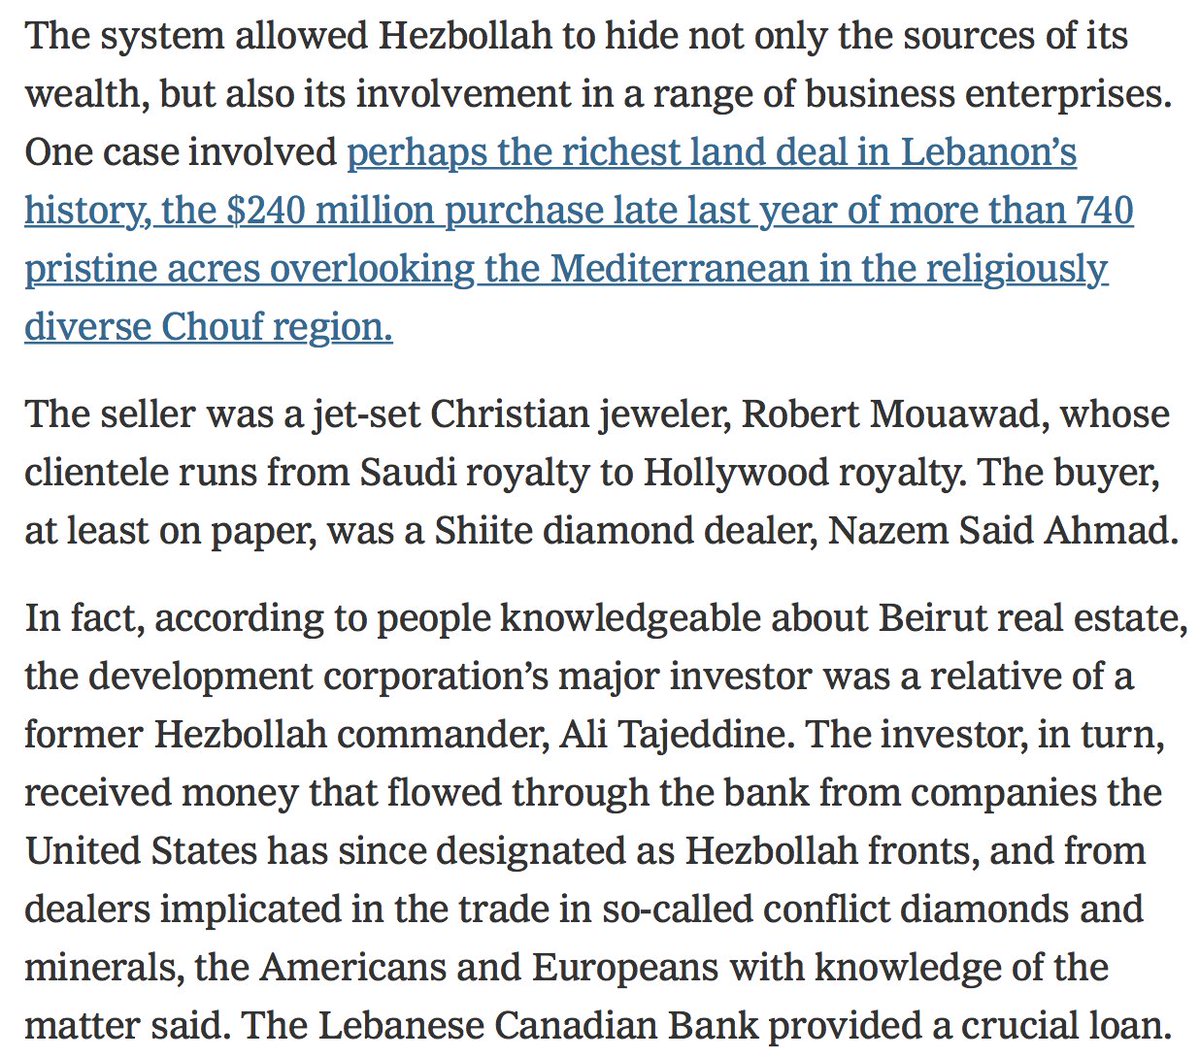 This is not to mention areas further south, where Tajco is just as active. Tajco is the developer of the massive Medyar project, first made famous in this story on Hezbollah’s money laundering machine, the Lebanese-Canadian Bank.  https://www.nytimes.com/2011/12/14/world/middleeast/beirut-bank-seen-as-a-hub-of-hezbollahs-financing.html 6/  https://twitter.com/AcrossTheBay/status/1311063806307692549